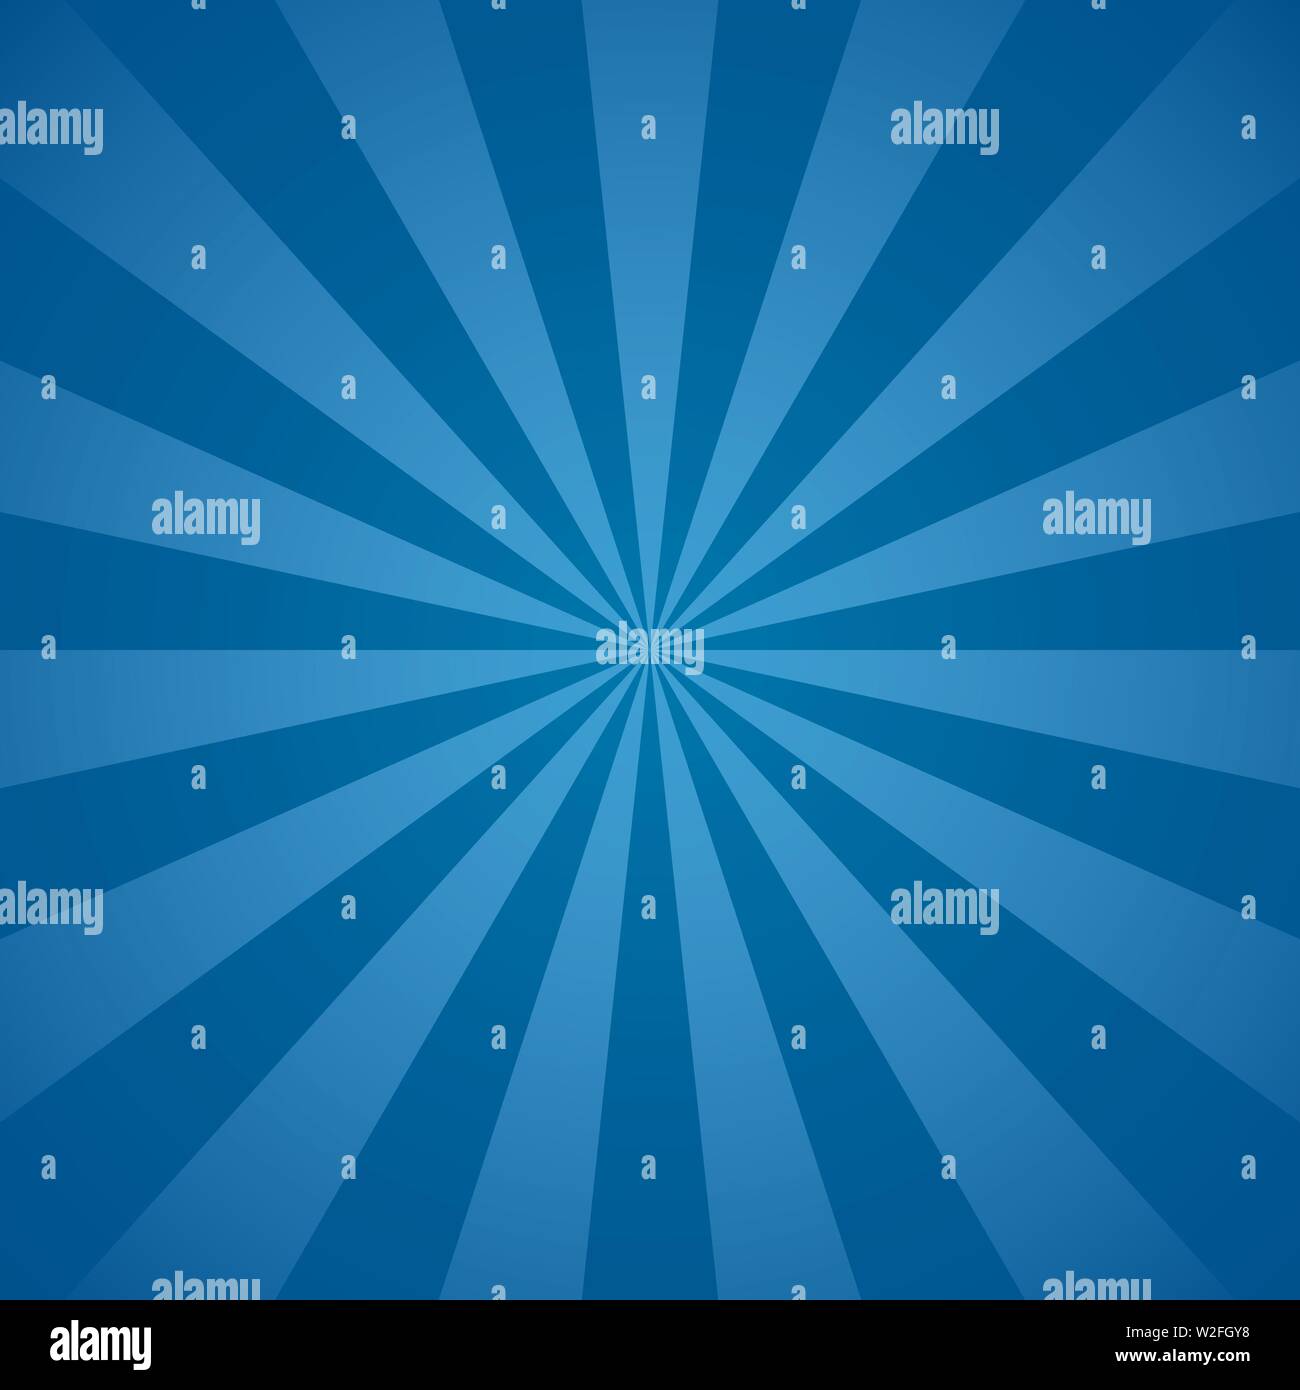 Blue beams and rays abstract vector illustration radial lines background Stock Vector